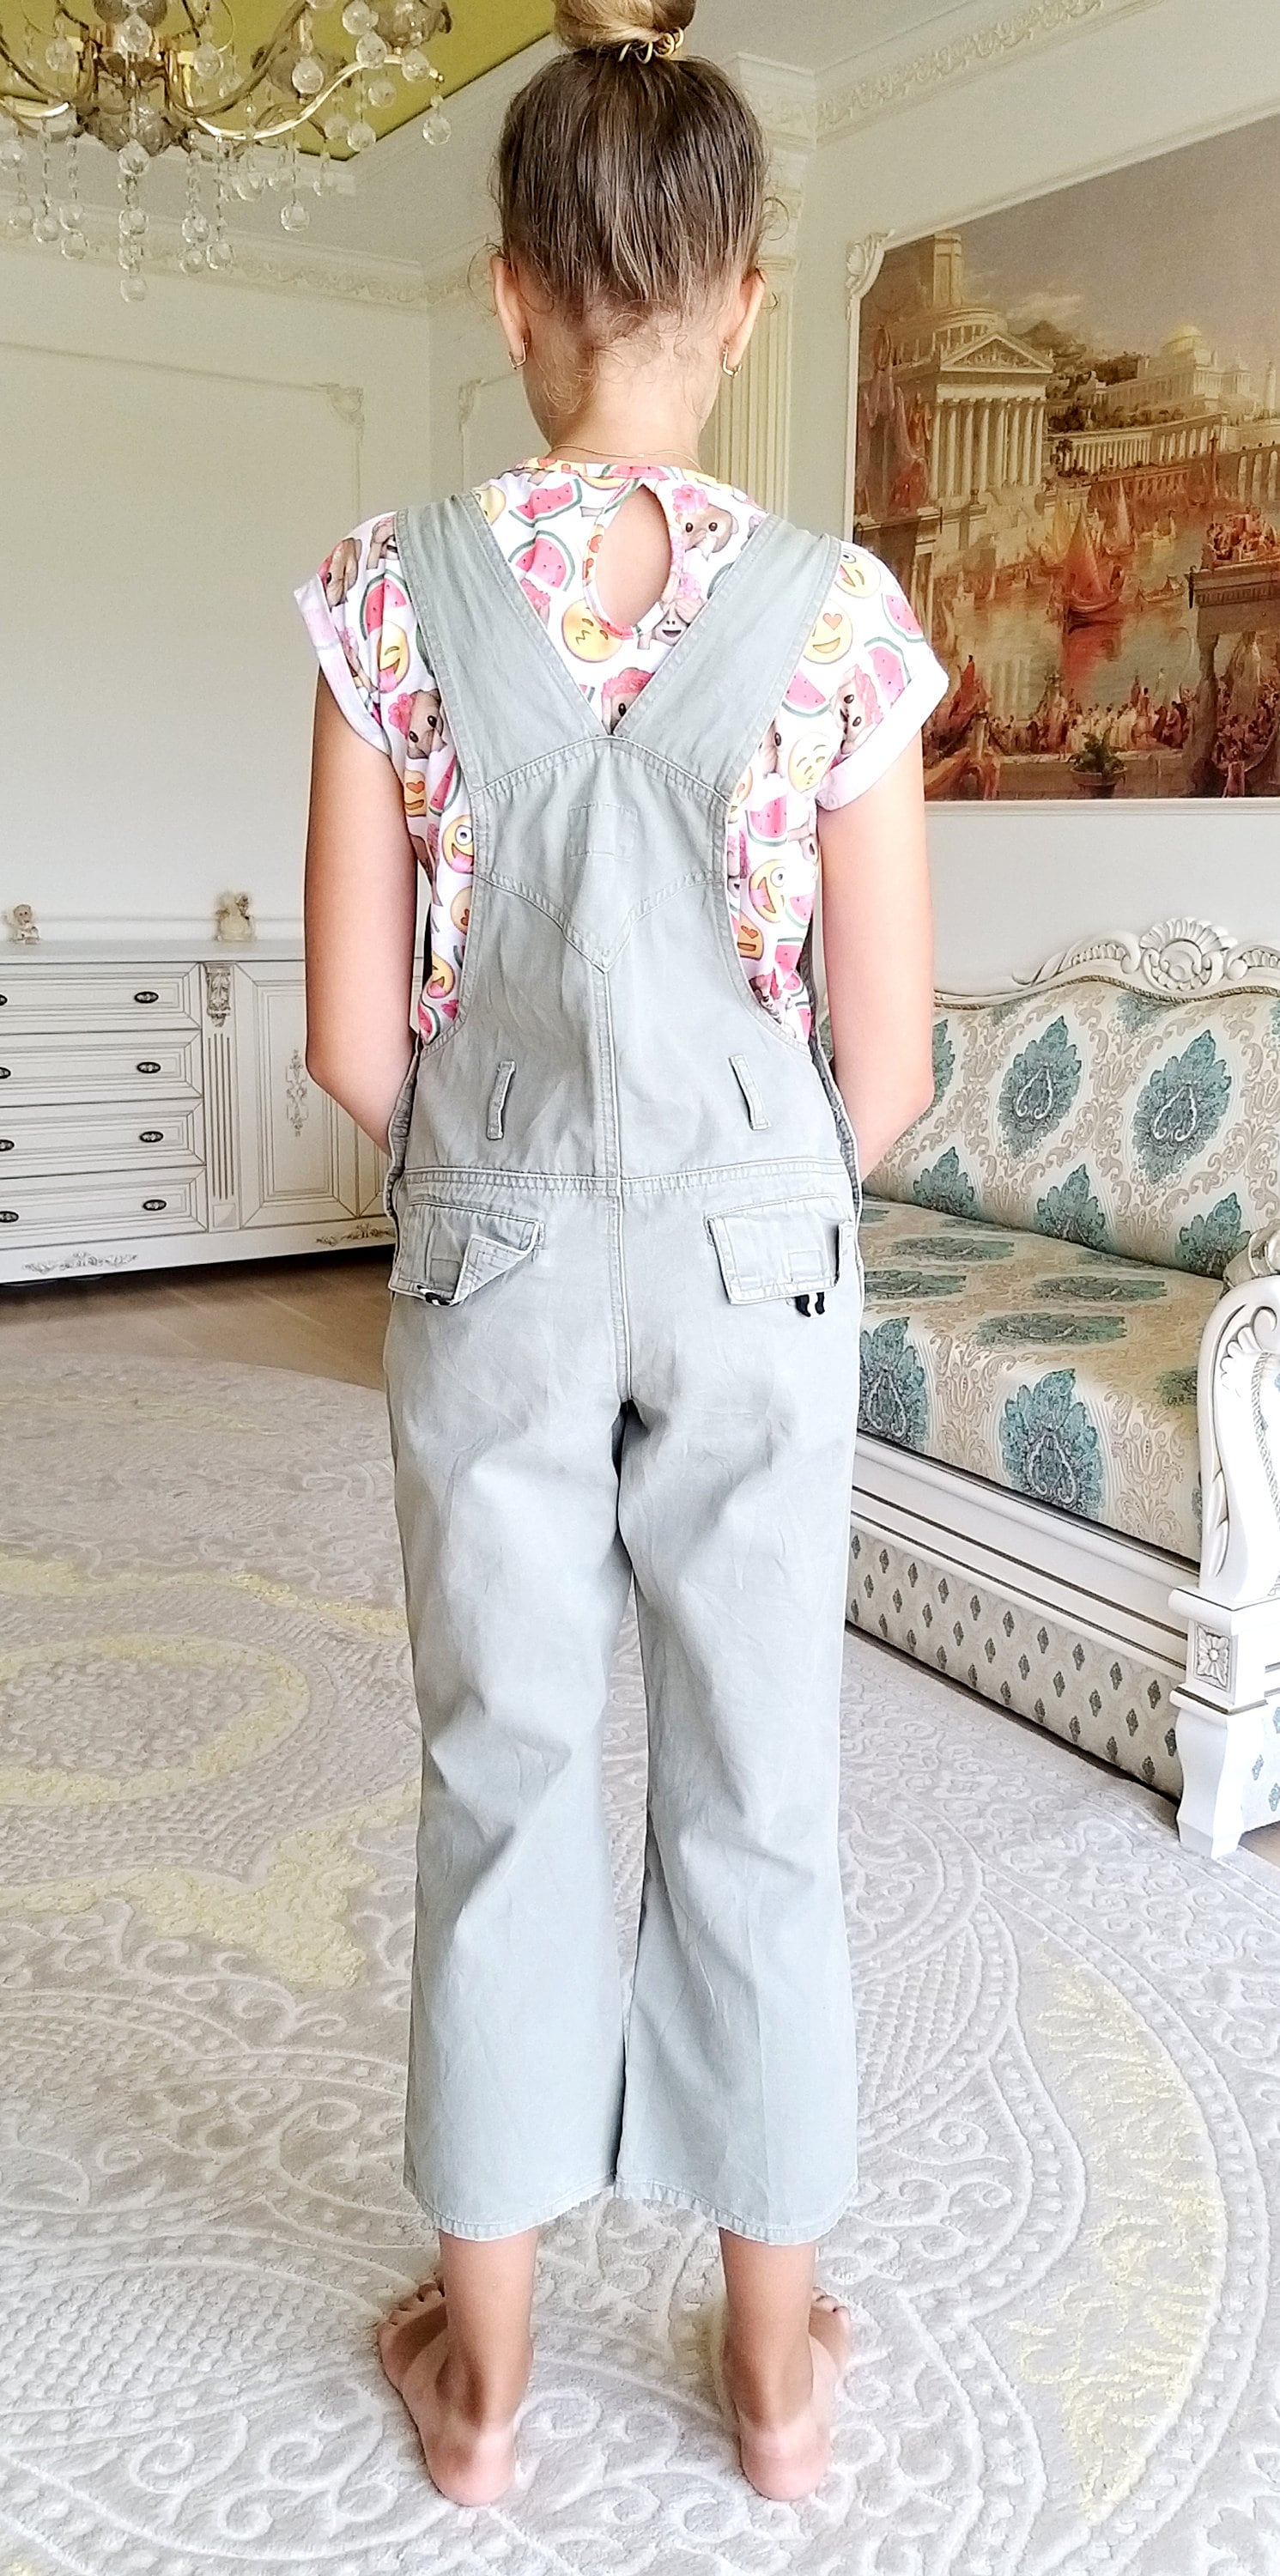 Girls Overalls 10 One Piece Olive Green Overalls Girls Etsy